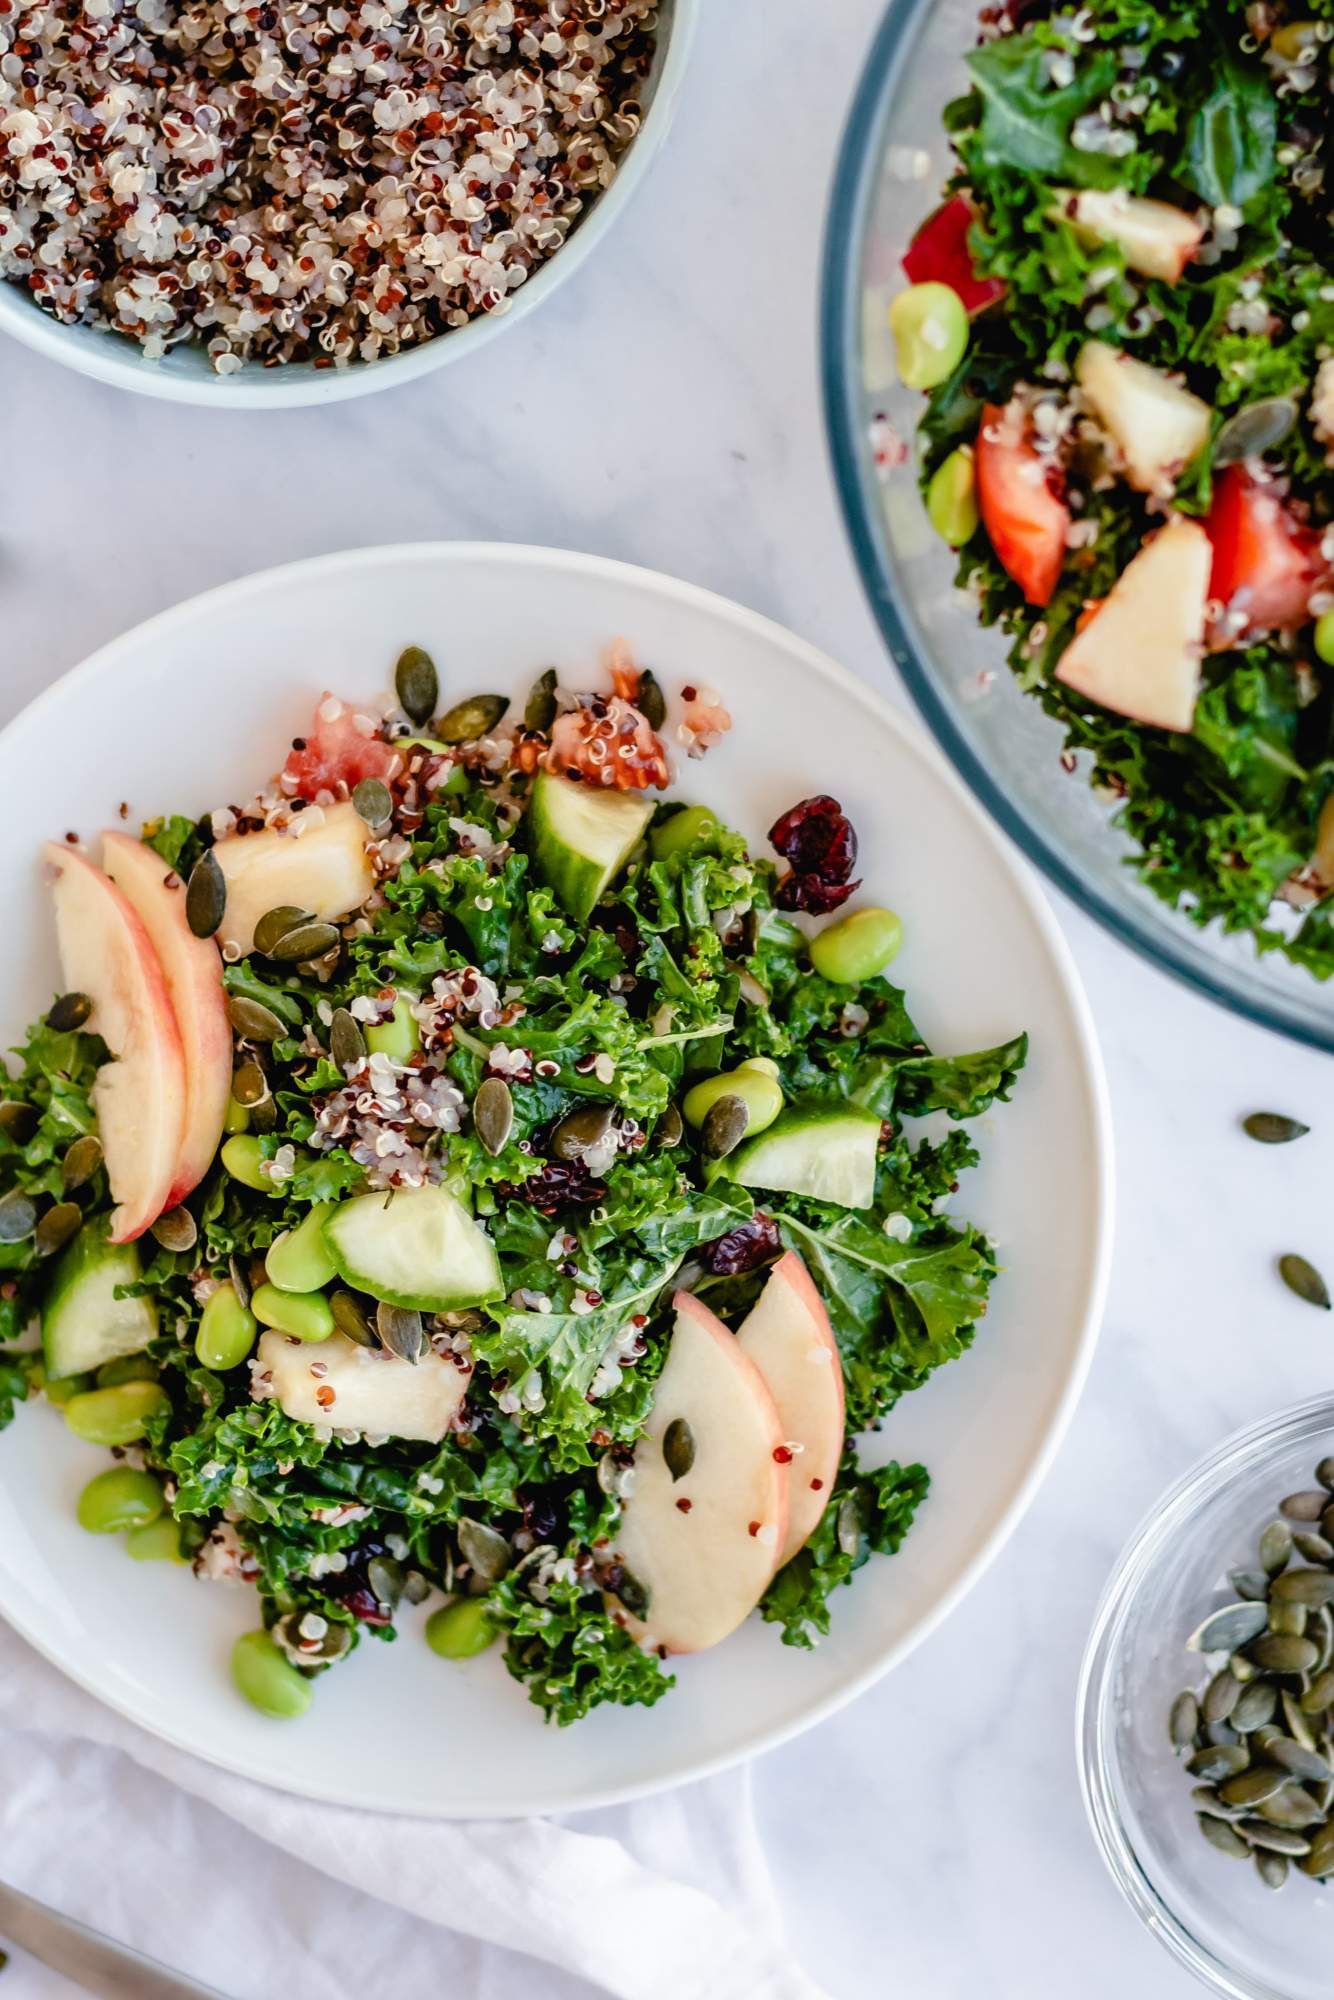 Quinoa and kale salad with honey lime dressing, apples, cooked quinoa, edamame, and dried cranberries.